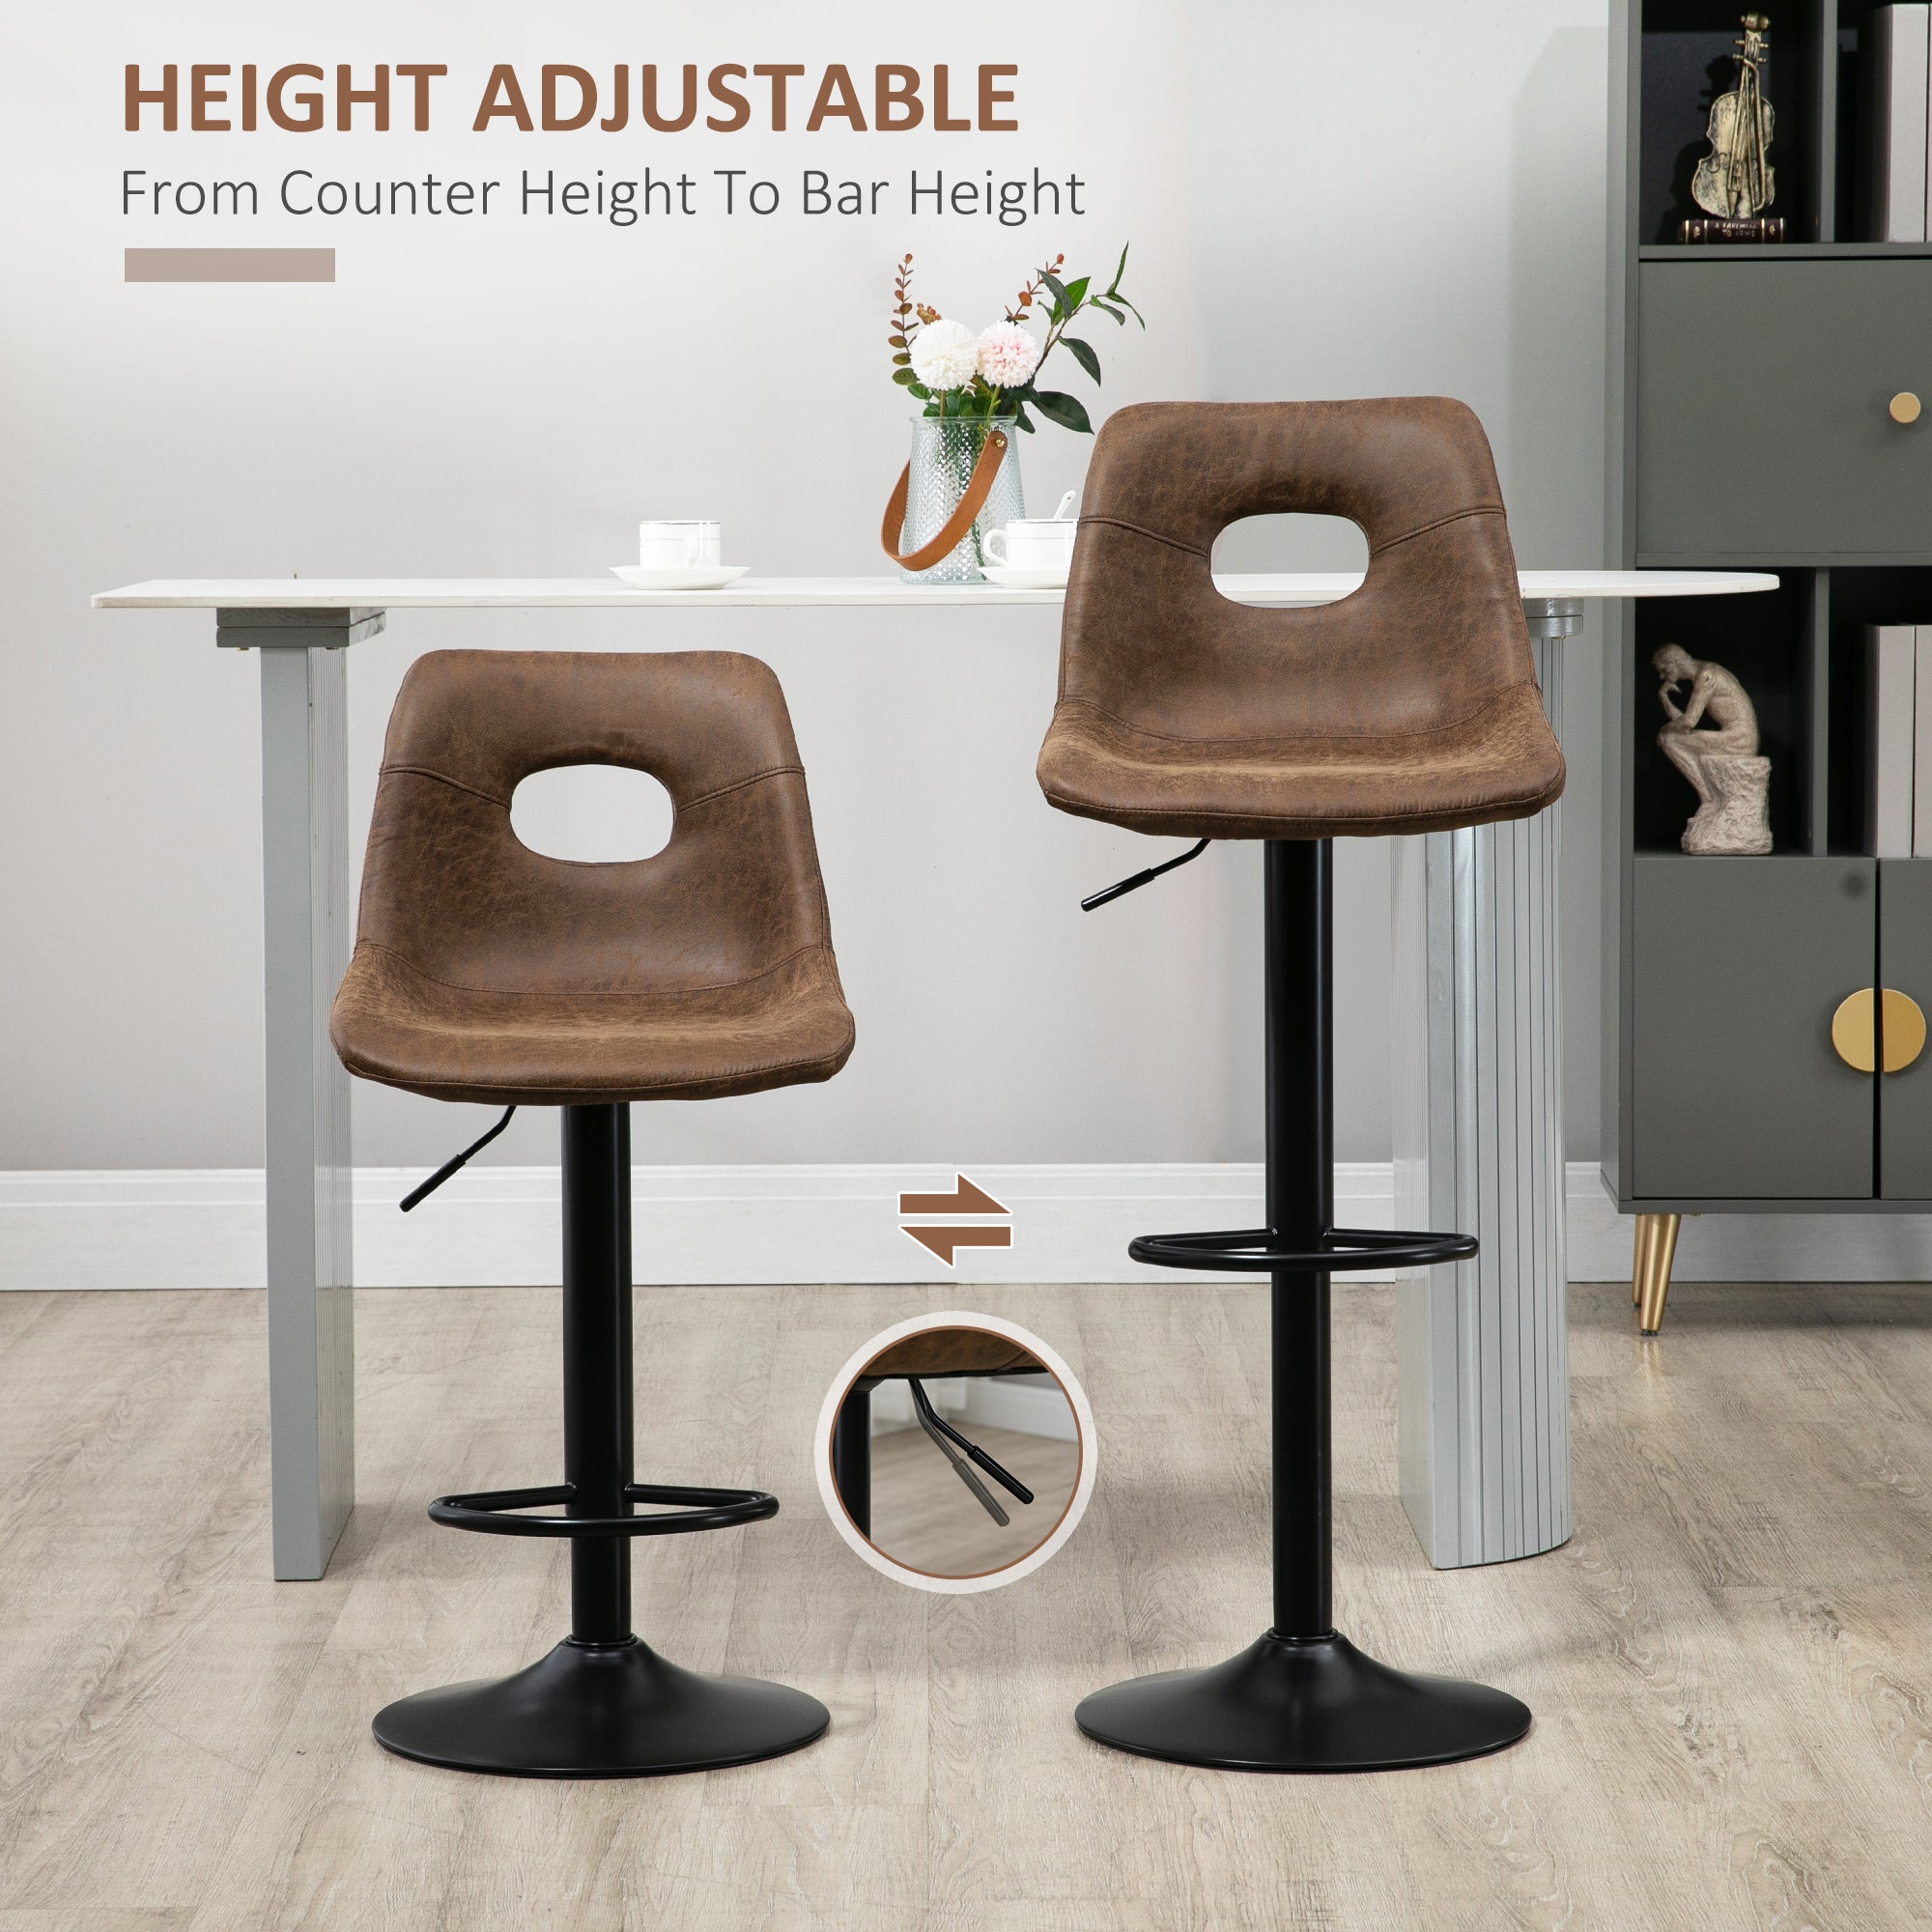 Set of 2 Bar stools With Backs,retro-look , faux leather, Adjustable Breakfast Dining Stools with Backrest, Footrest, Brown  AOSOM   